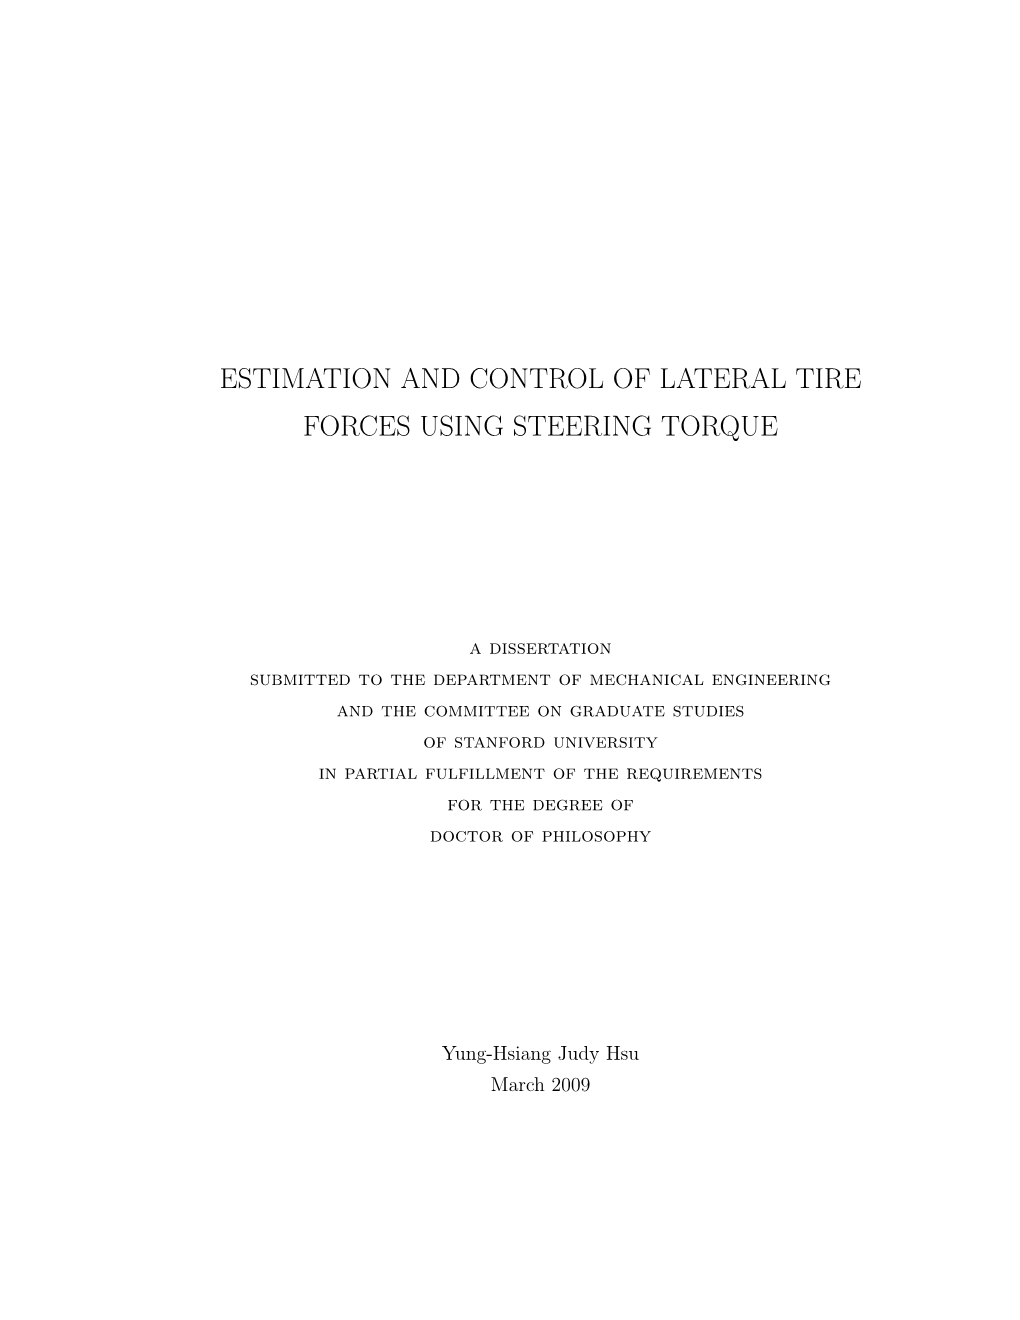 Estimation and Control of Lateral Tire Forces Using Steering Torque